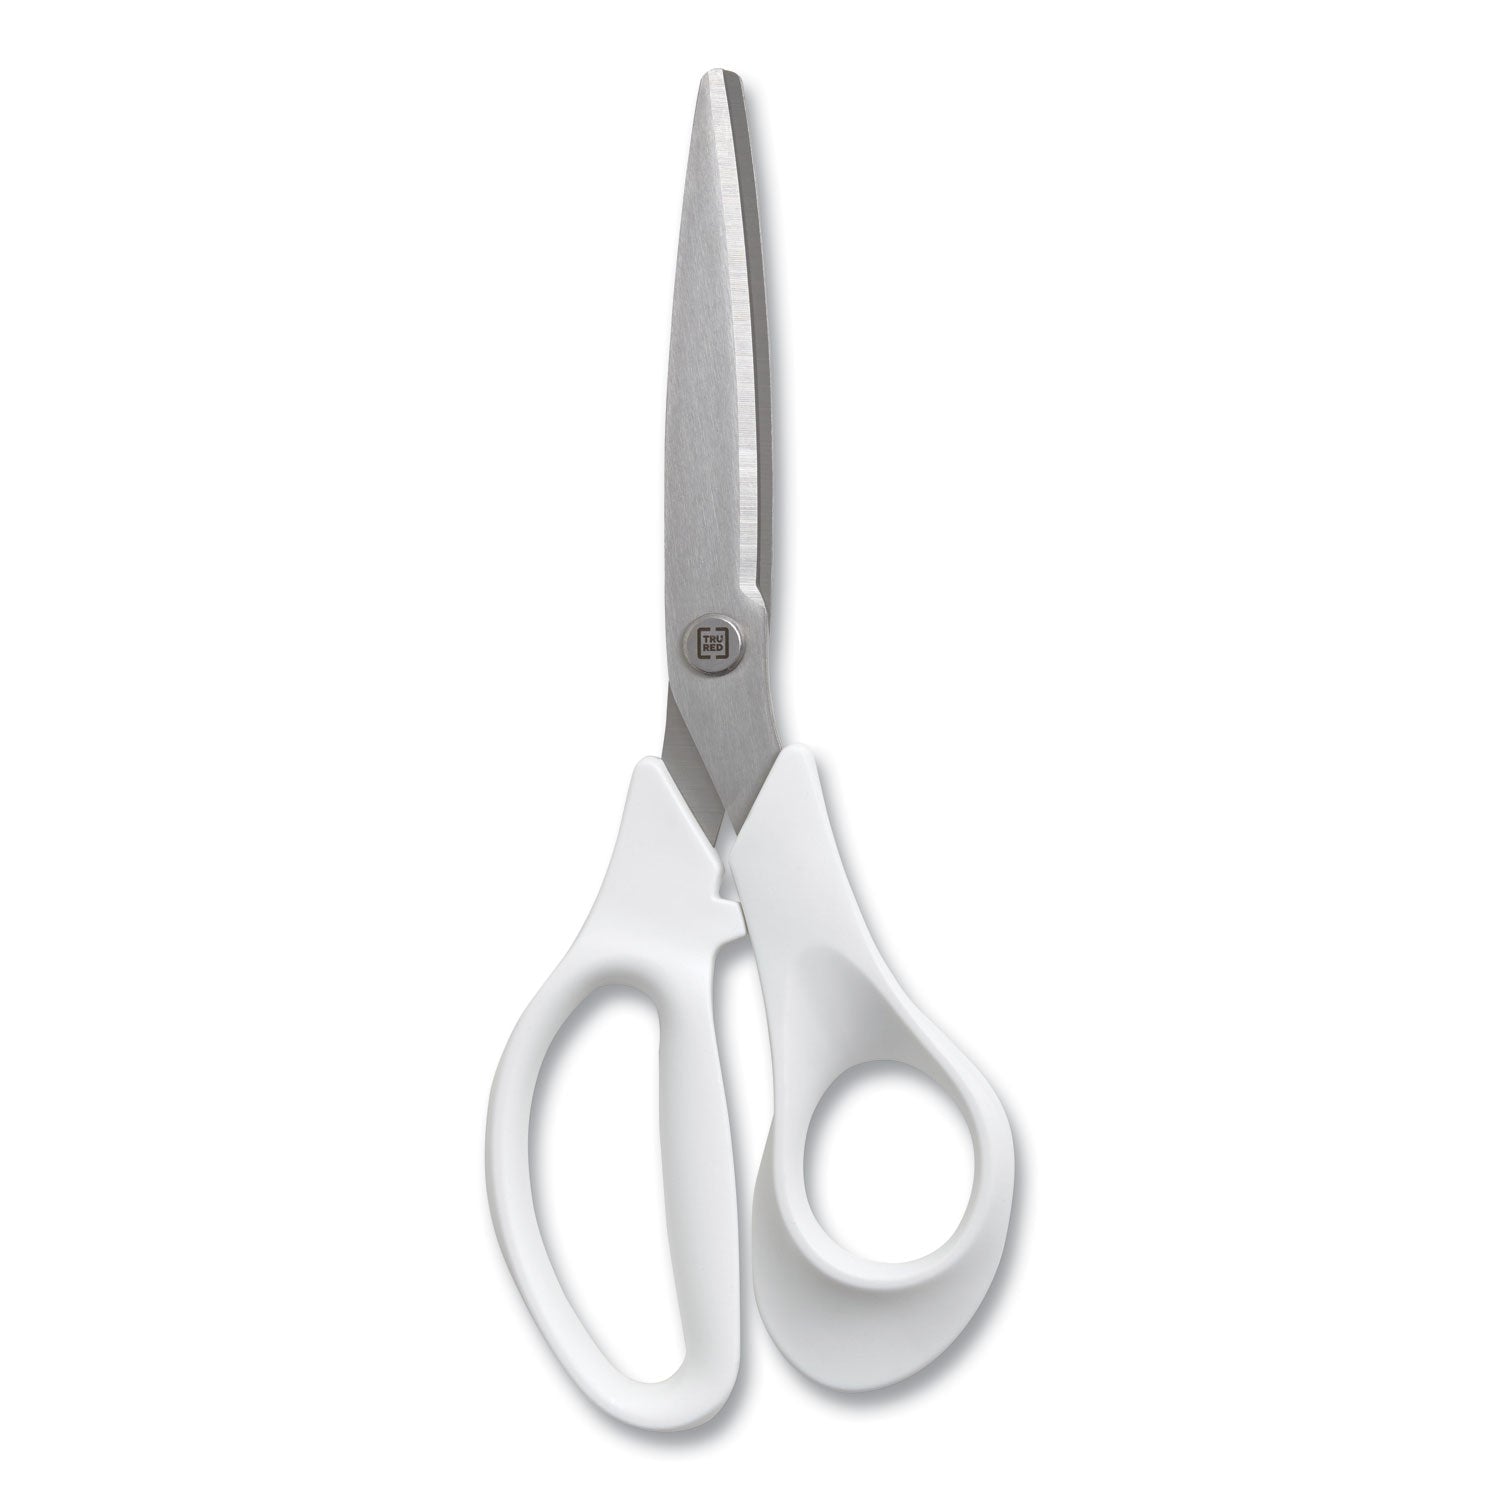 stainless-steel-scissors-8-long-358-cut-length-assorted-straight-handles-2-pack_tud24380494 - 3